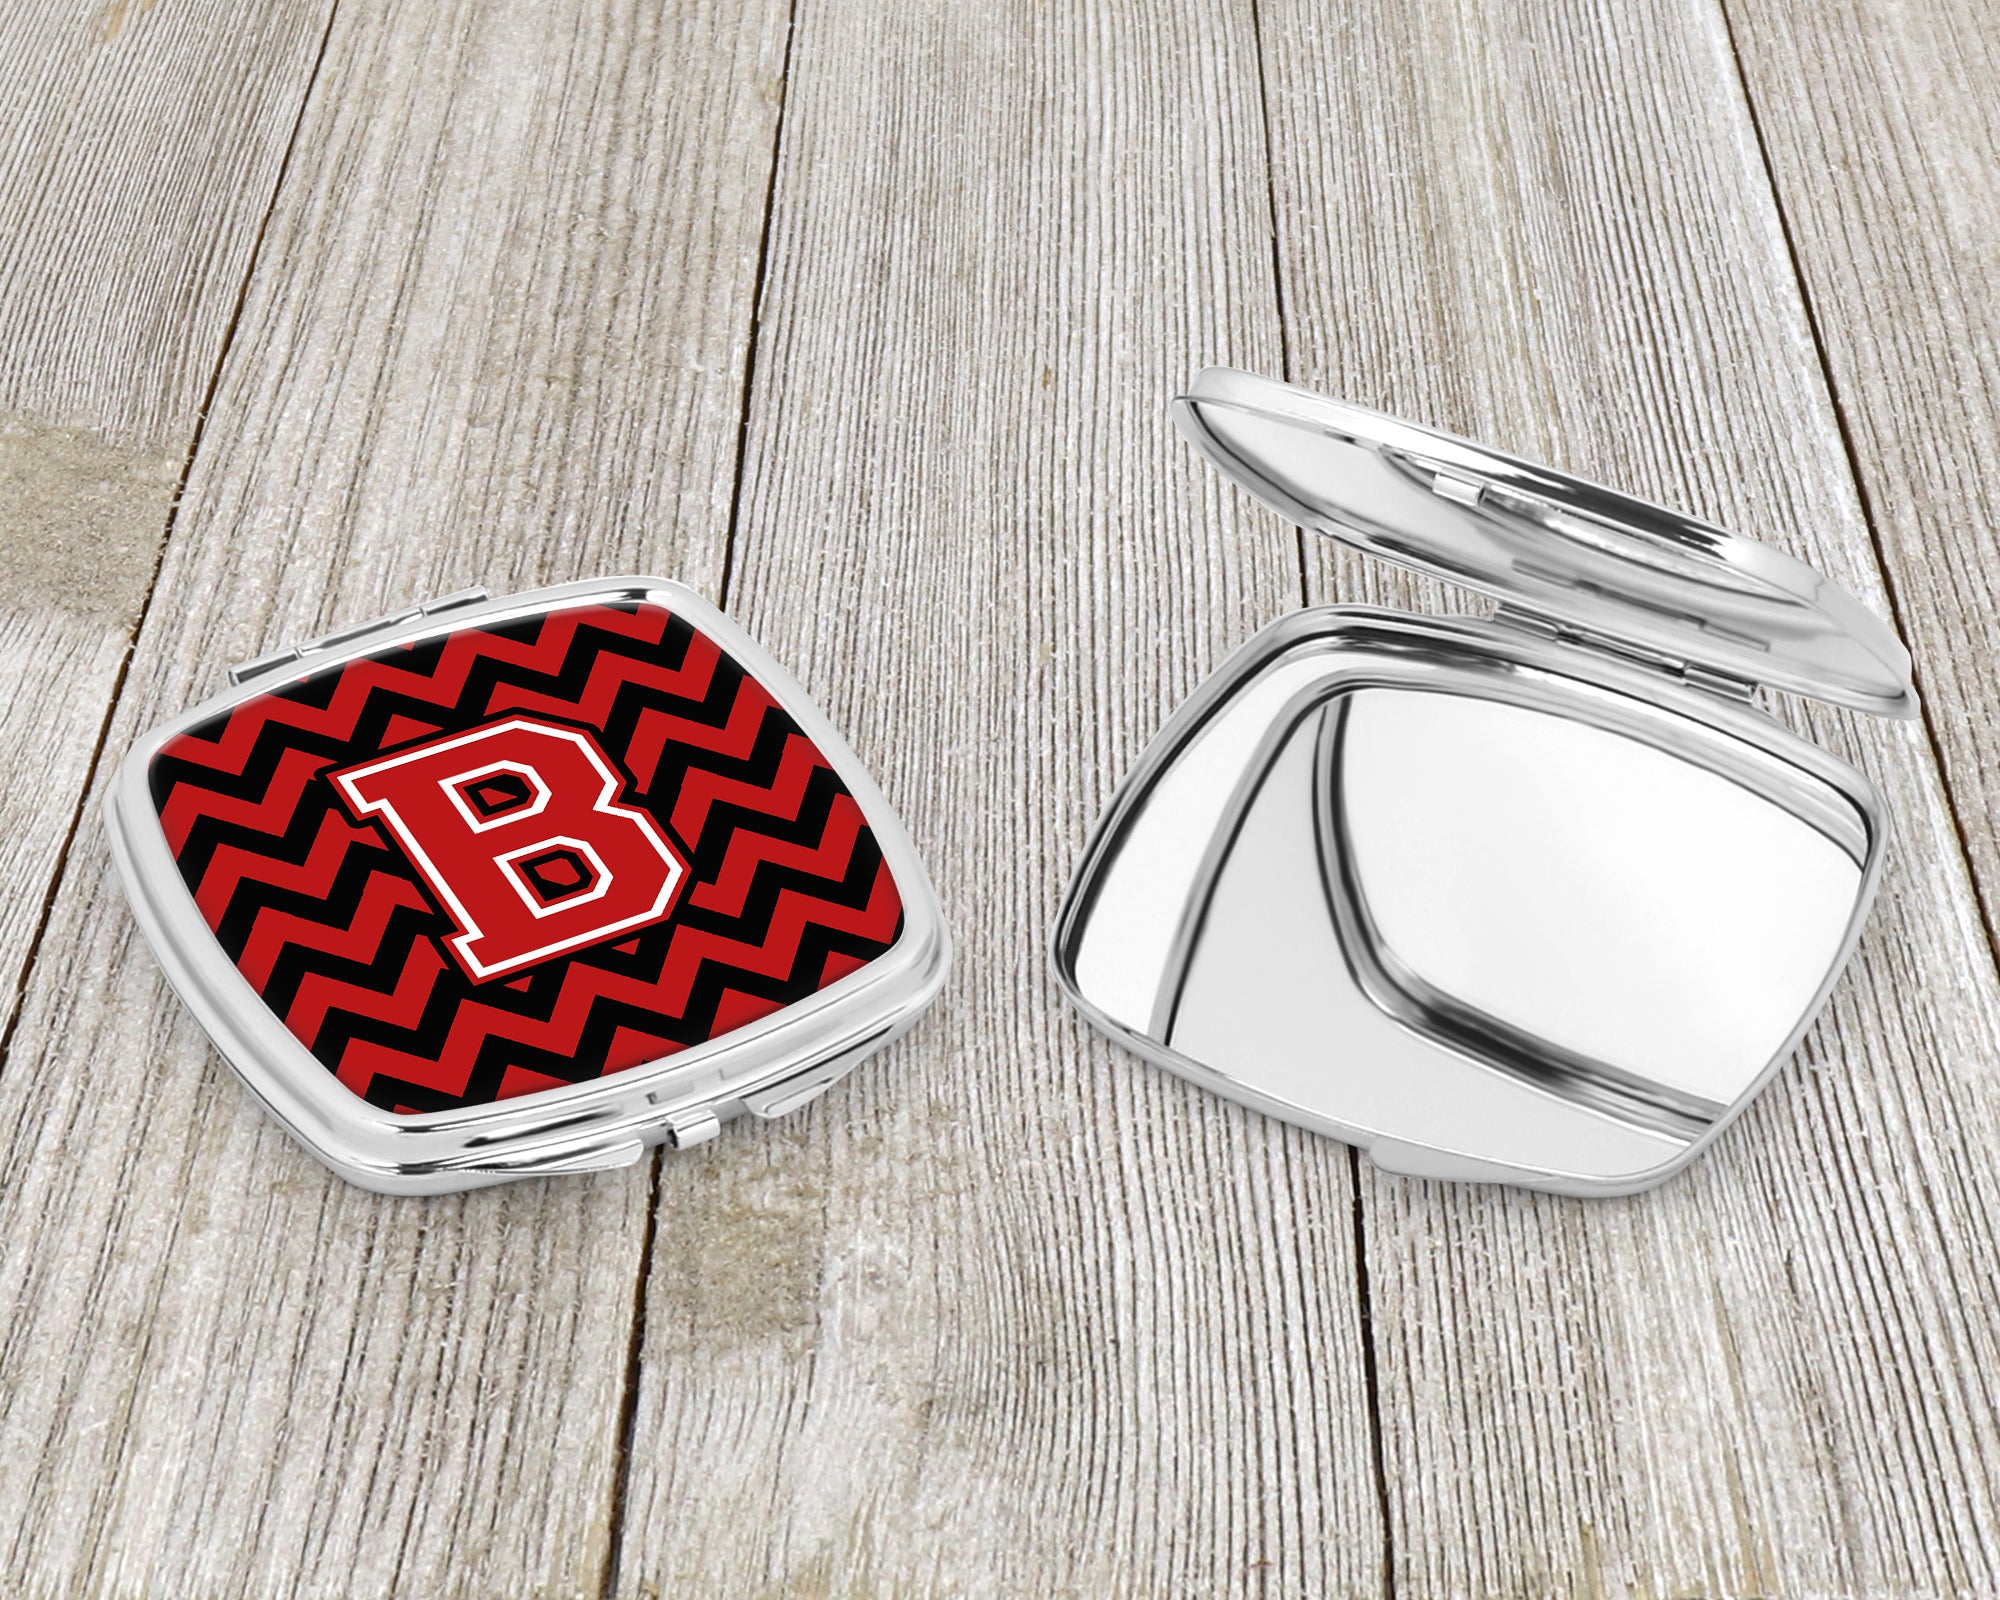 Letter B Chevron Black and Red   Compact Mirror CJ1047-BSCM  the-store.com.